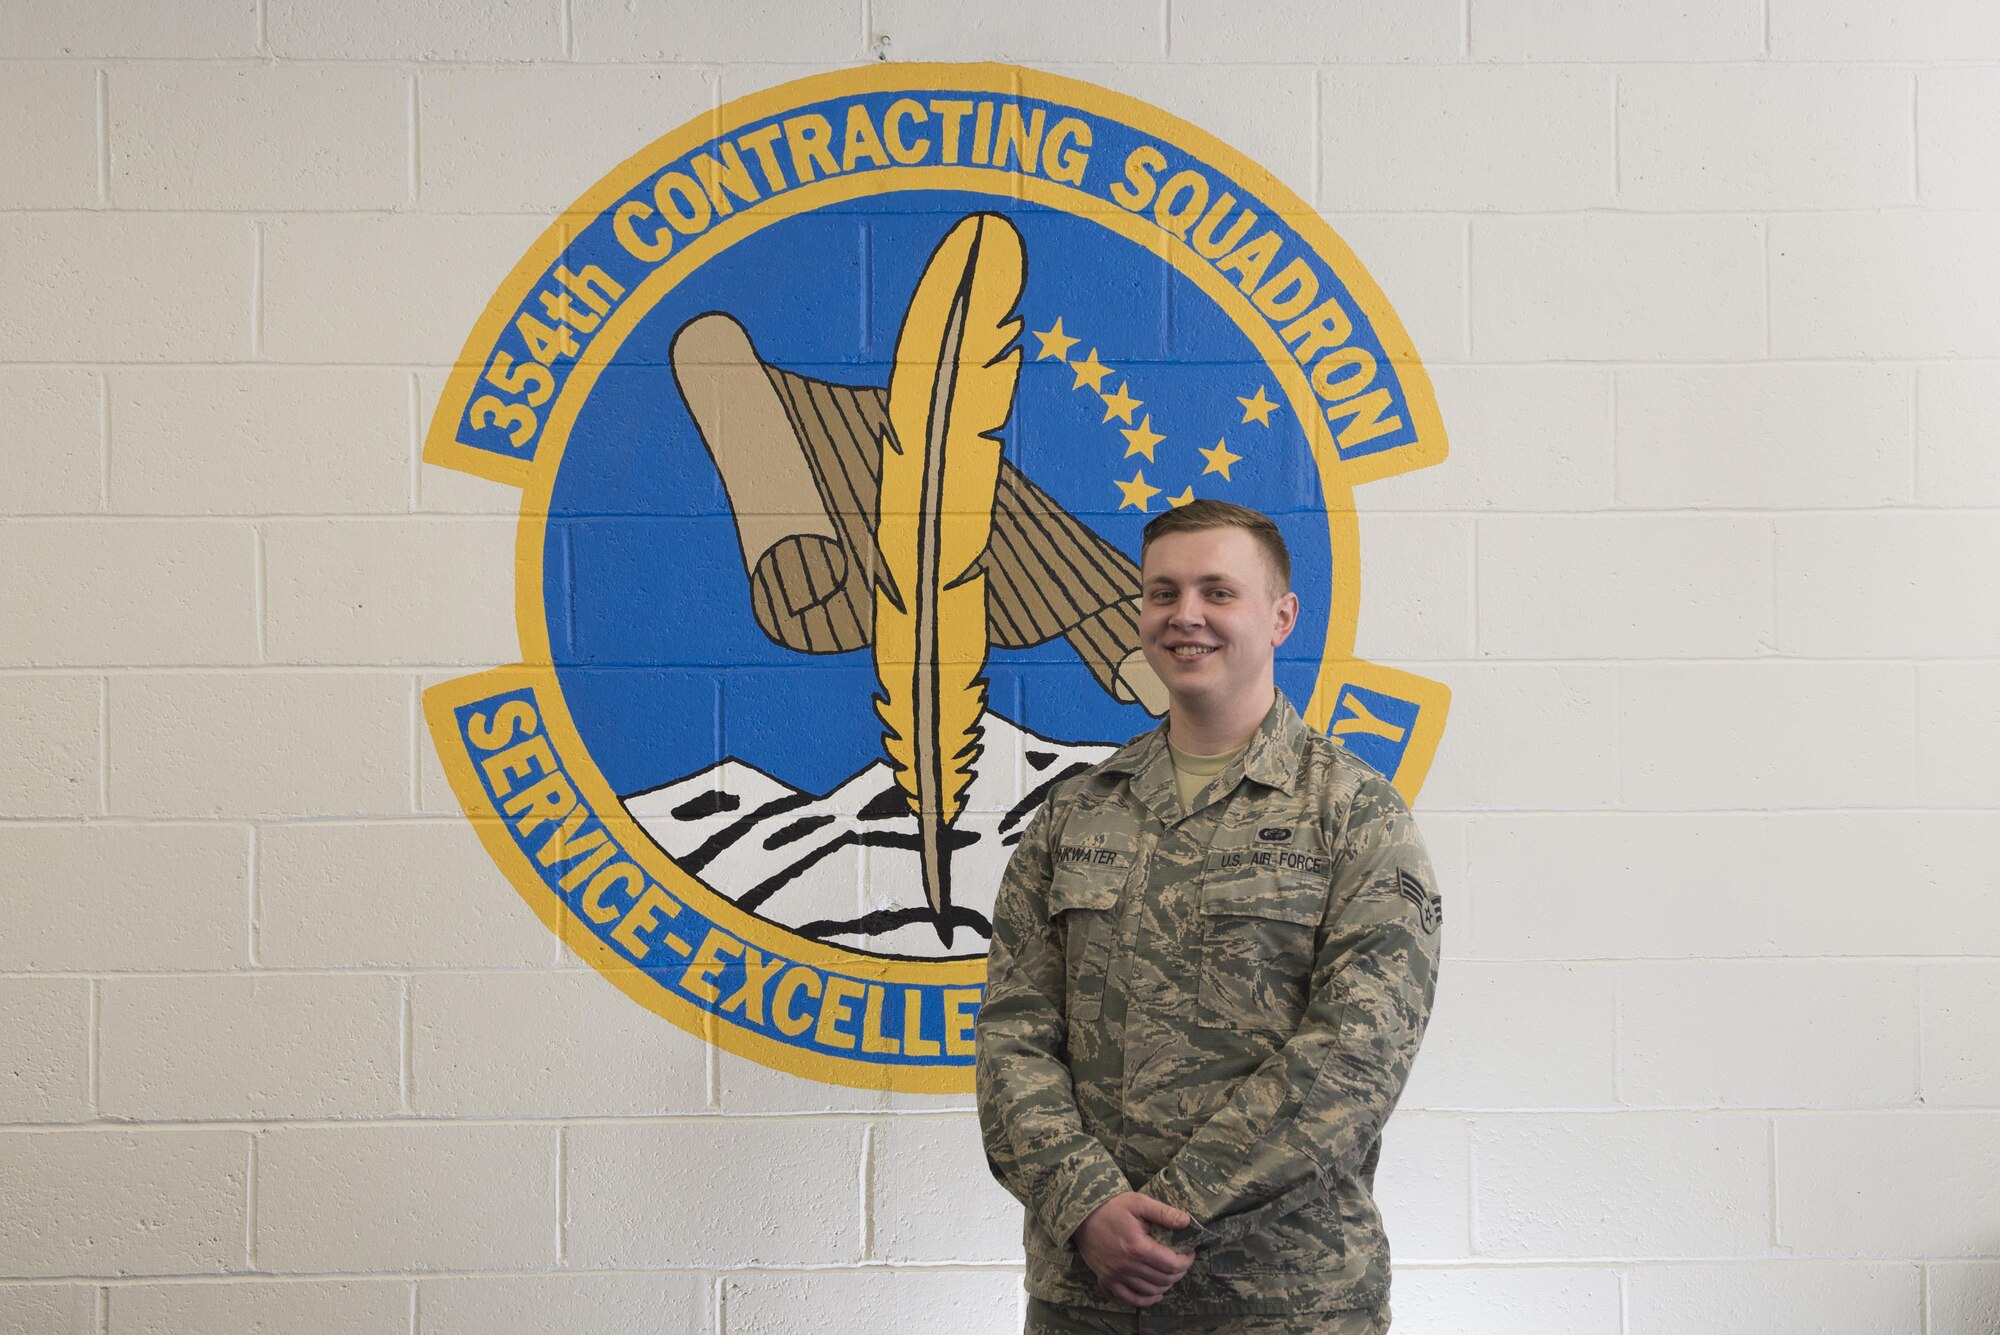 U.S Air Force Senior Airman Michael Drinkwater, a 354th Contracting Squadron contract specialist, poses for a photo April 17, 2017, at Eielson Air Force Base, Alaska. Drinkwater was originally born in England but his family later moved to the United States where he joined the Air Force. (U.S. Air Force photo by Airman Eric M. Fisher)